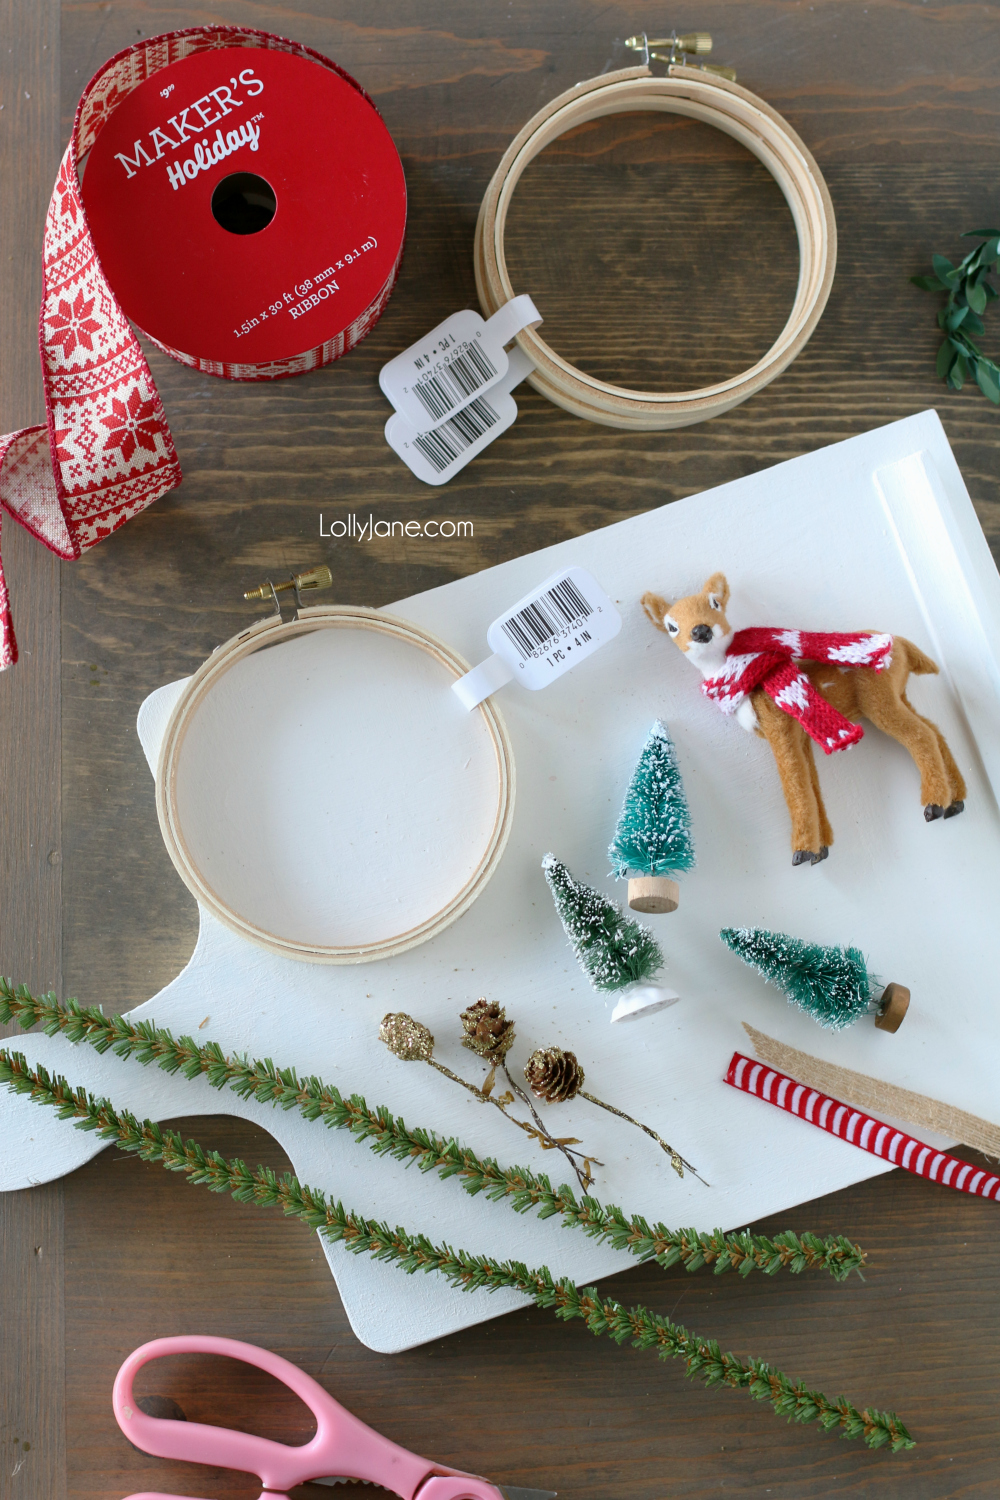 Supplies to make Easy DIY Embroidery Hoop Christmas Ornaments... so cute and fun for the kids to help! Click through to see at lollyjane.com! #diy #diyornaments #christmasornaments #christmasdecorations